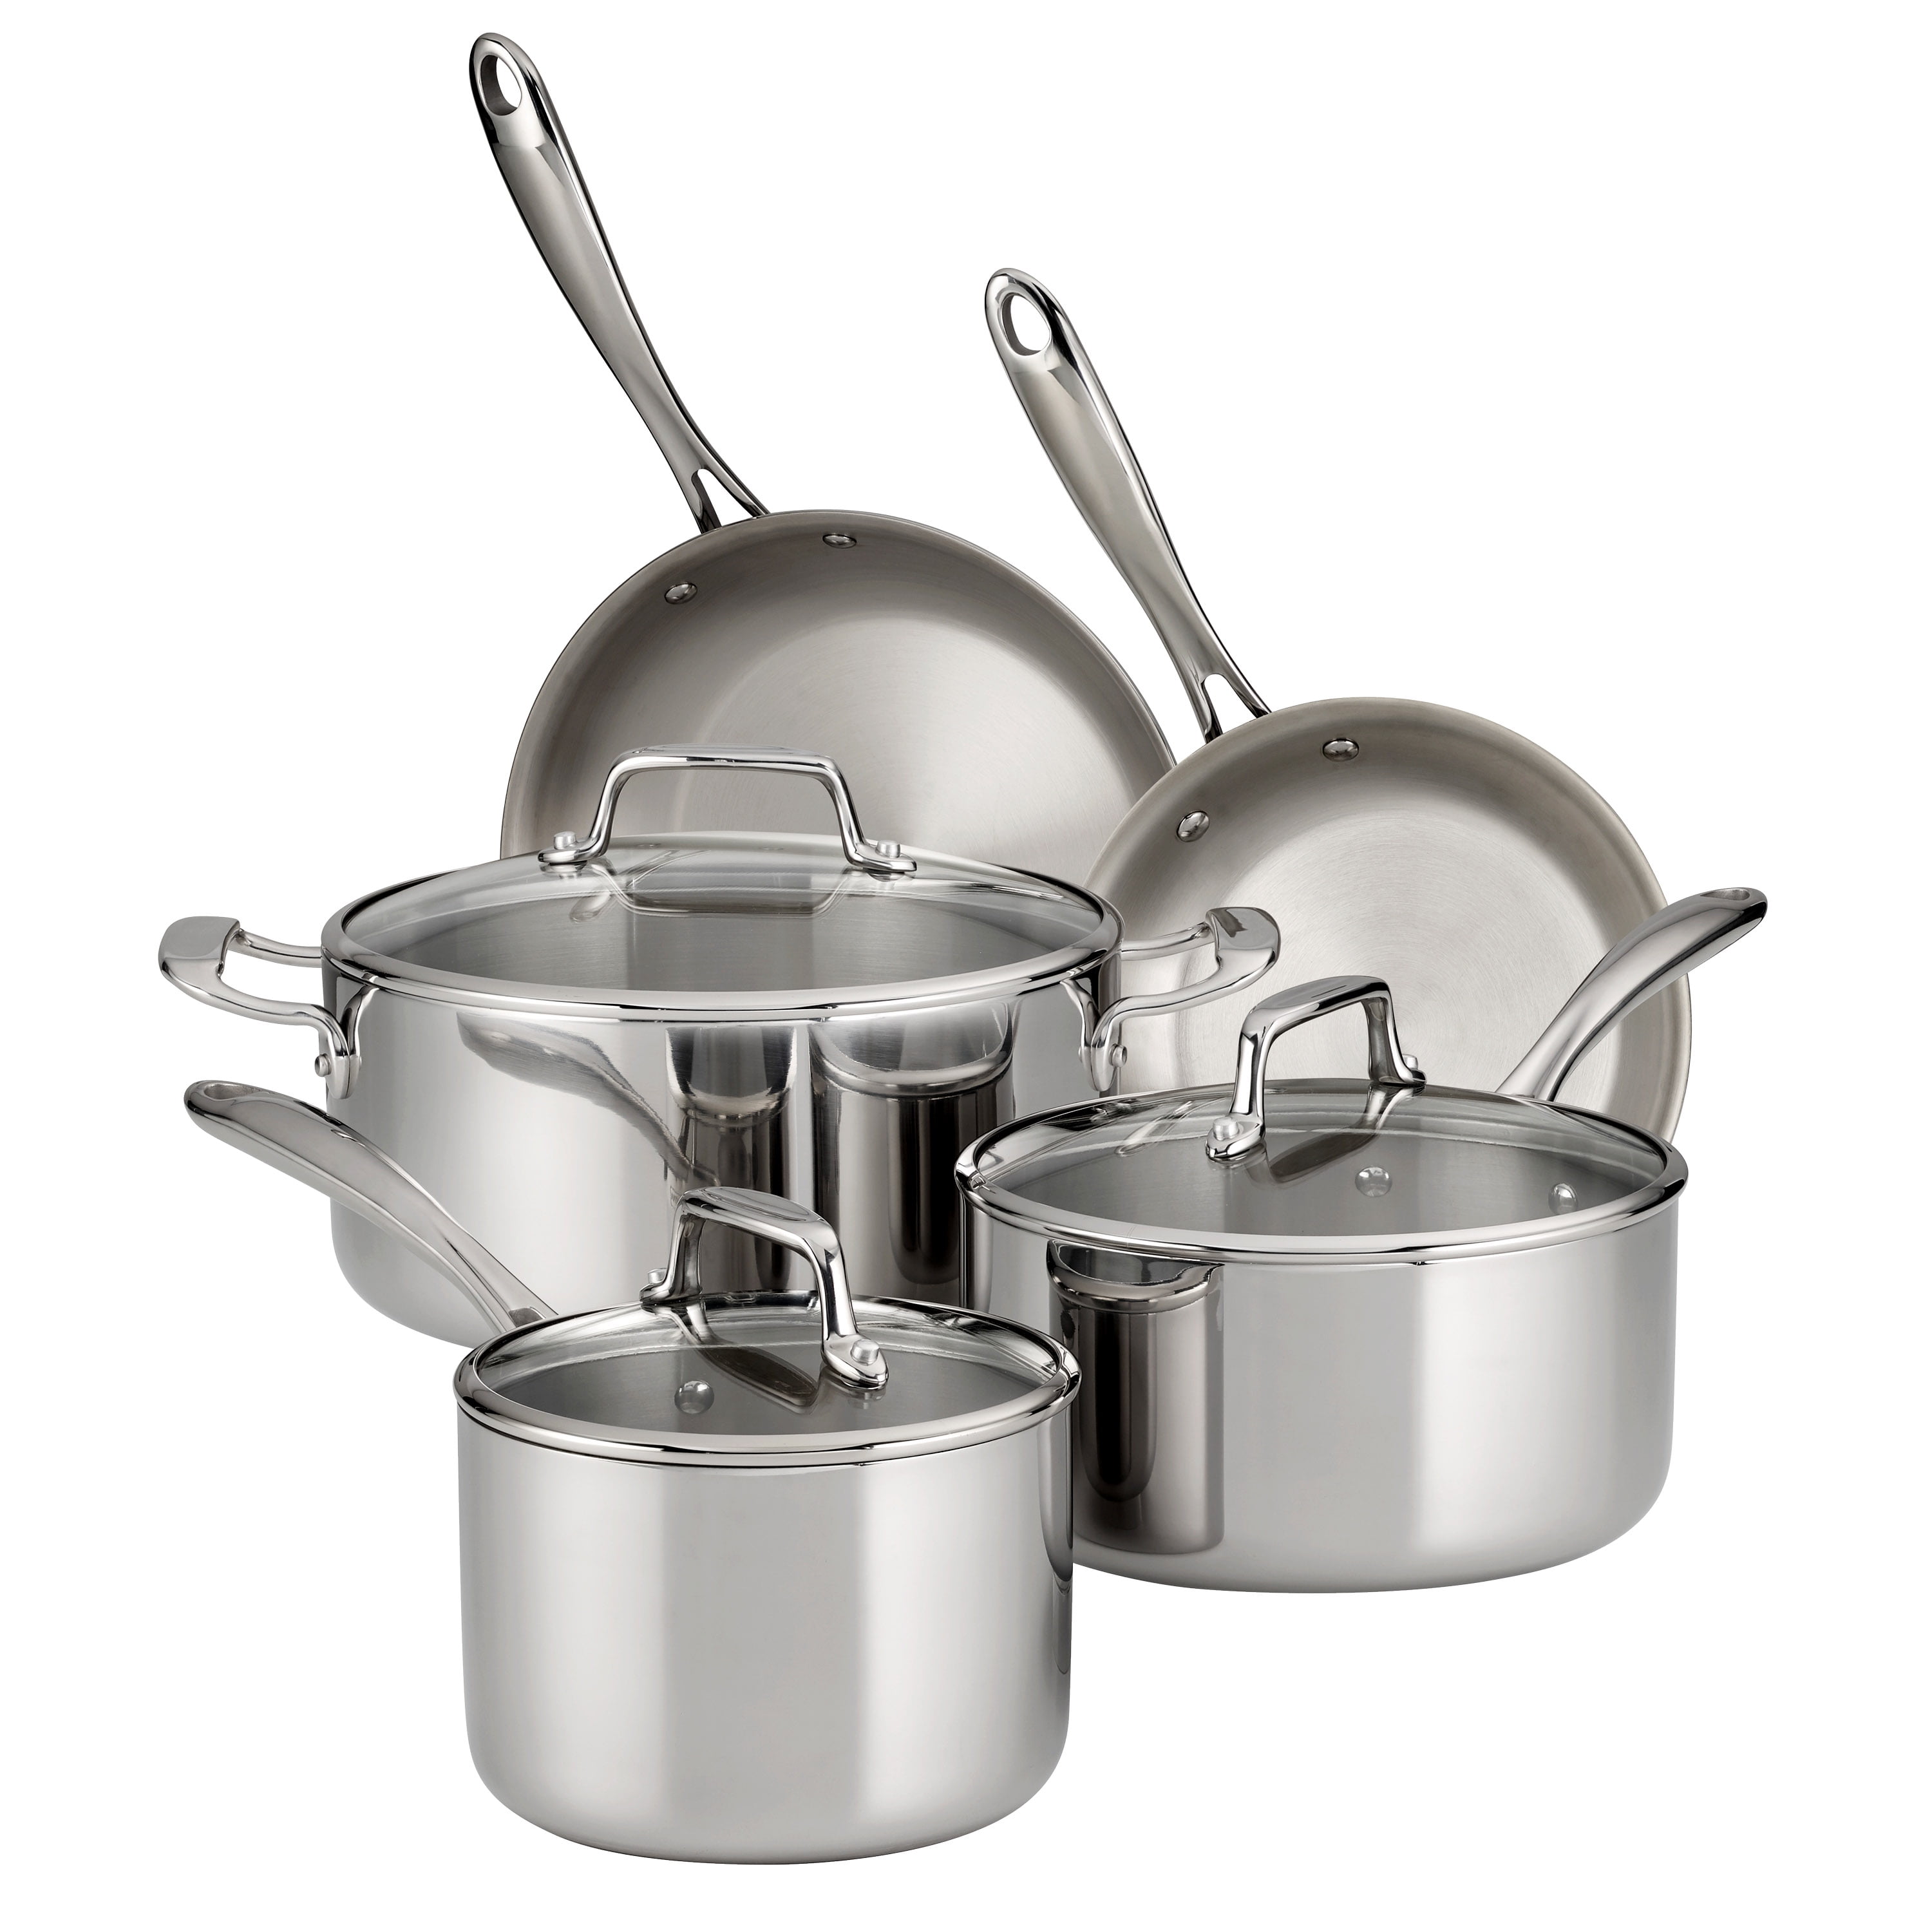 Tramontina Gourmet 8 Piece Tri-Ply Clad Stainless Steel Cookware Set Nouveau